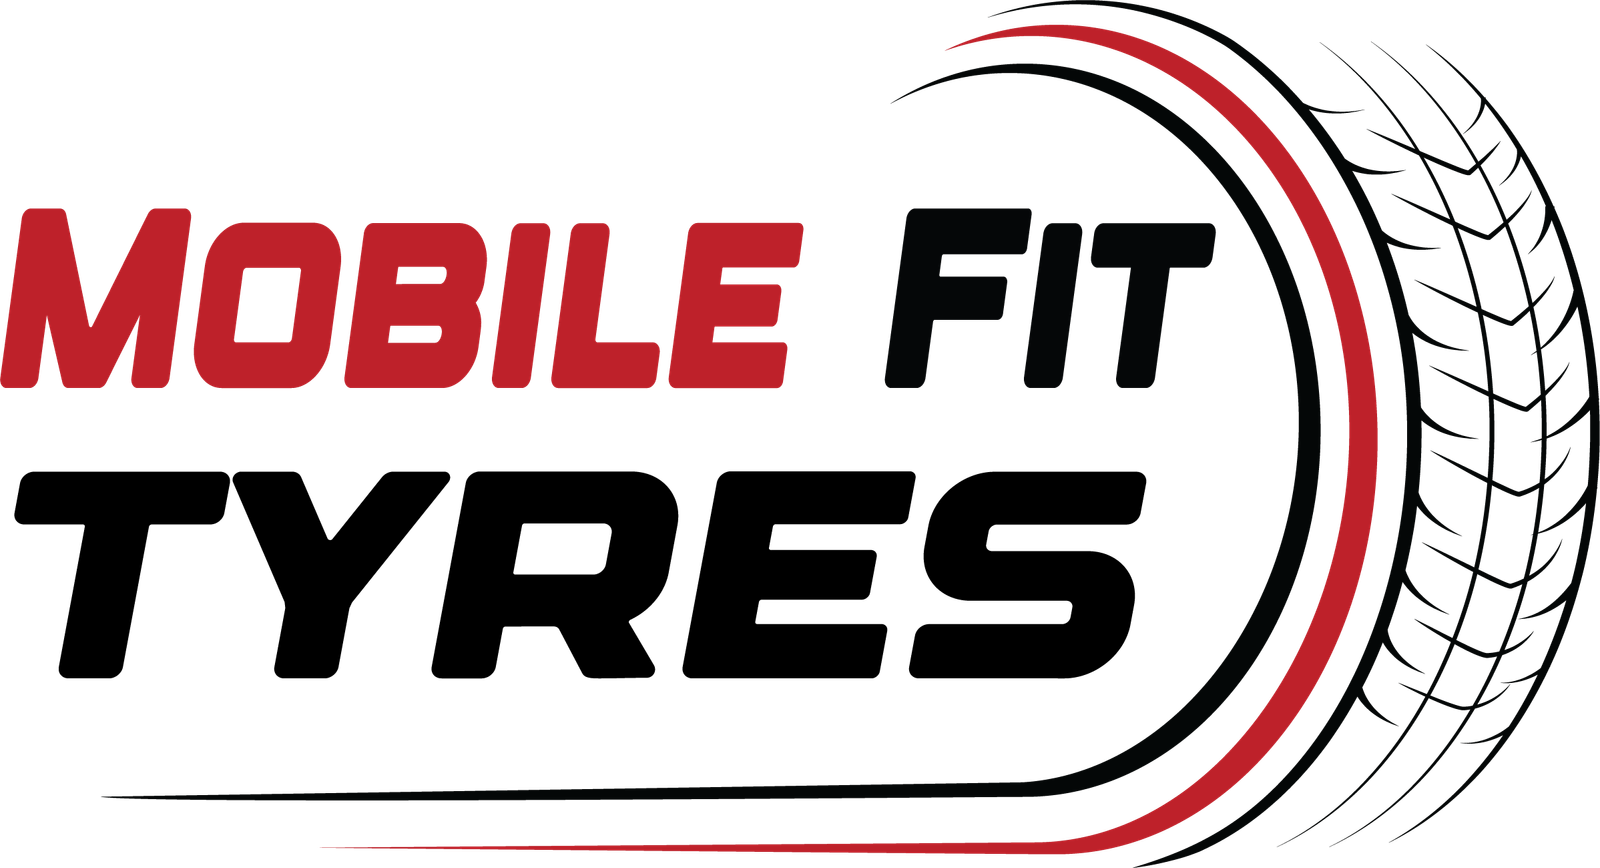 Mobile fit tyres